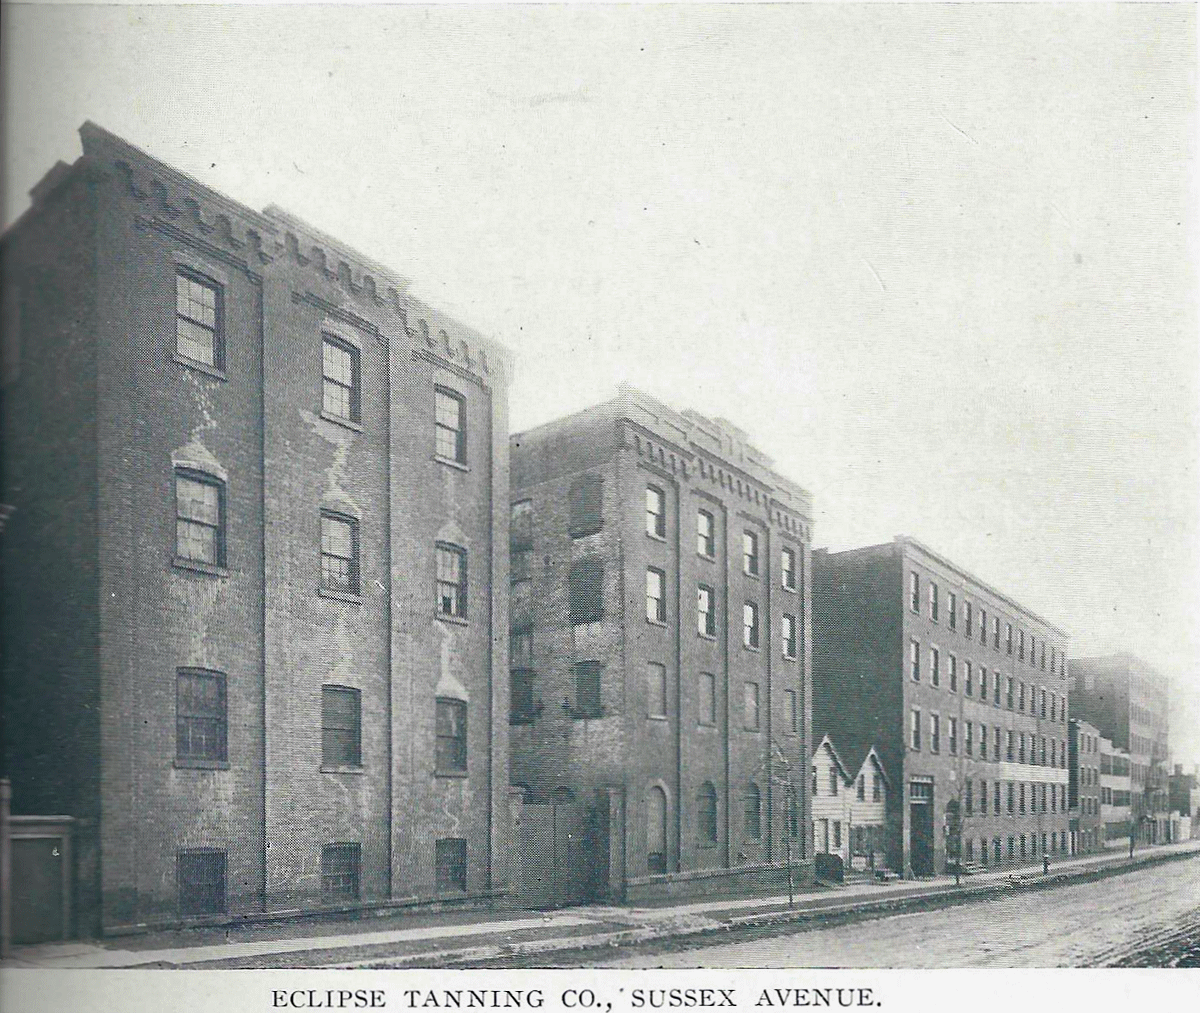 119 Sussex Avenue
From: "Newark, the City of Industry" Published by the Newark Board of Trade 1912
